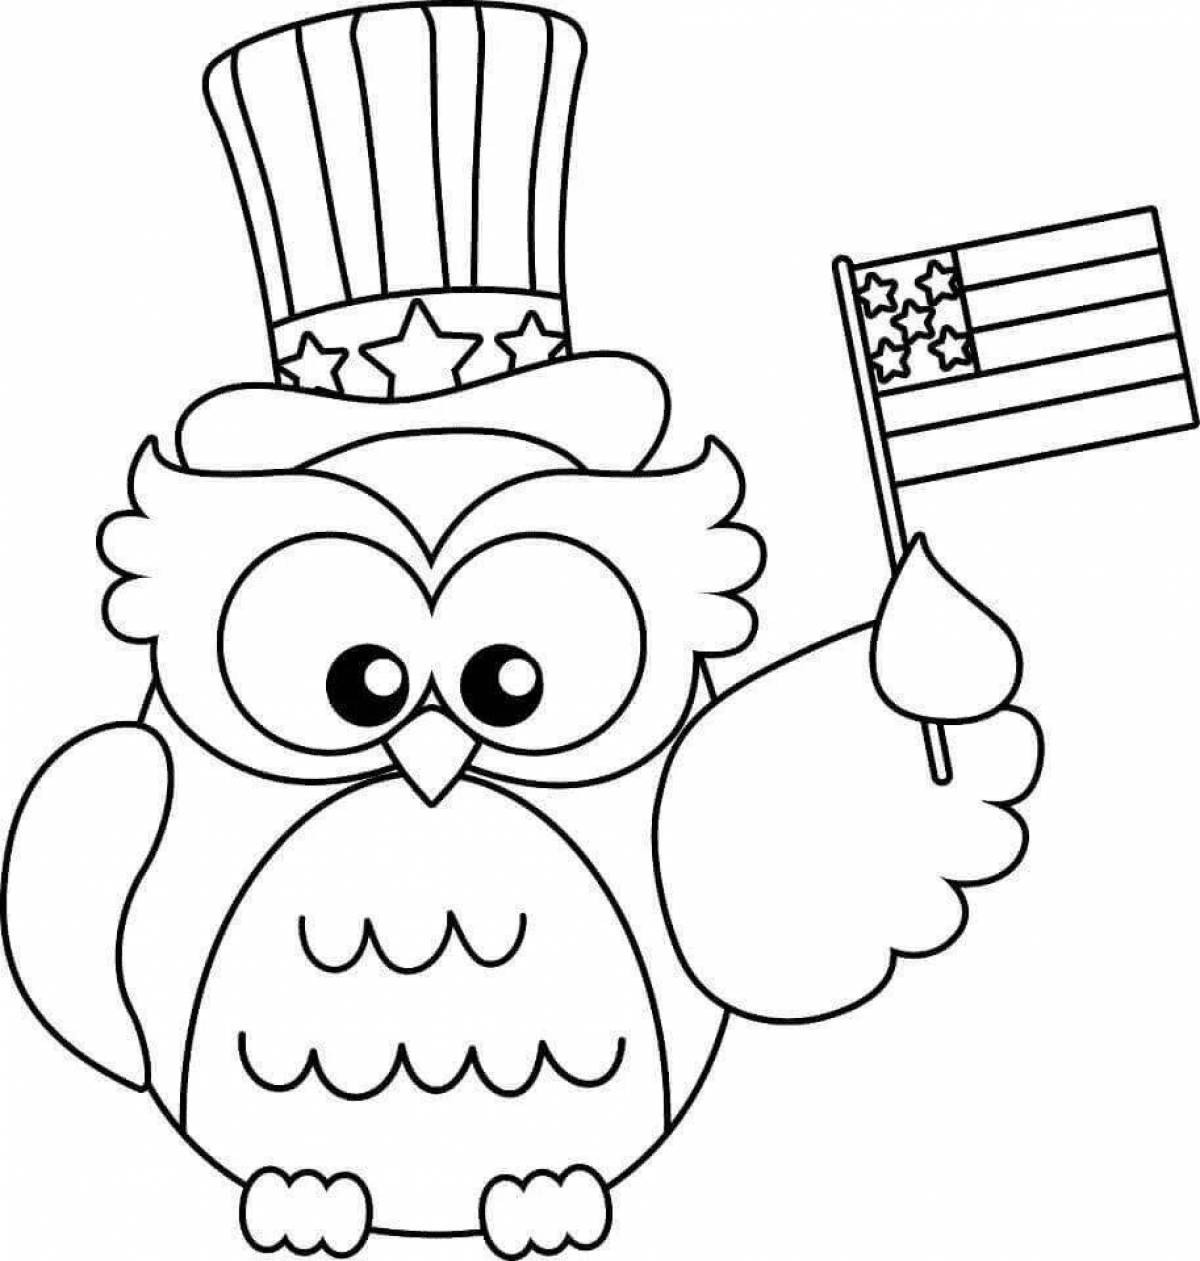 Incredible smart owl coloring book for kids